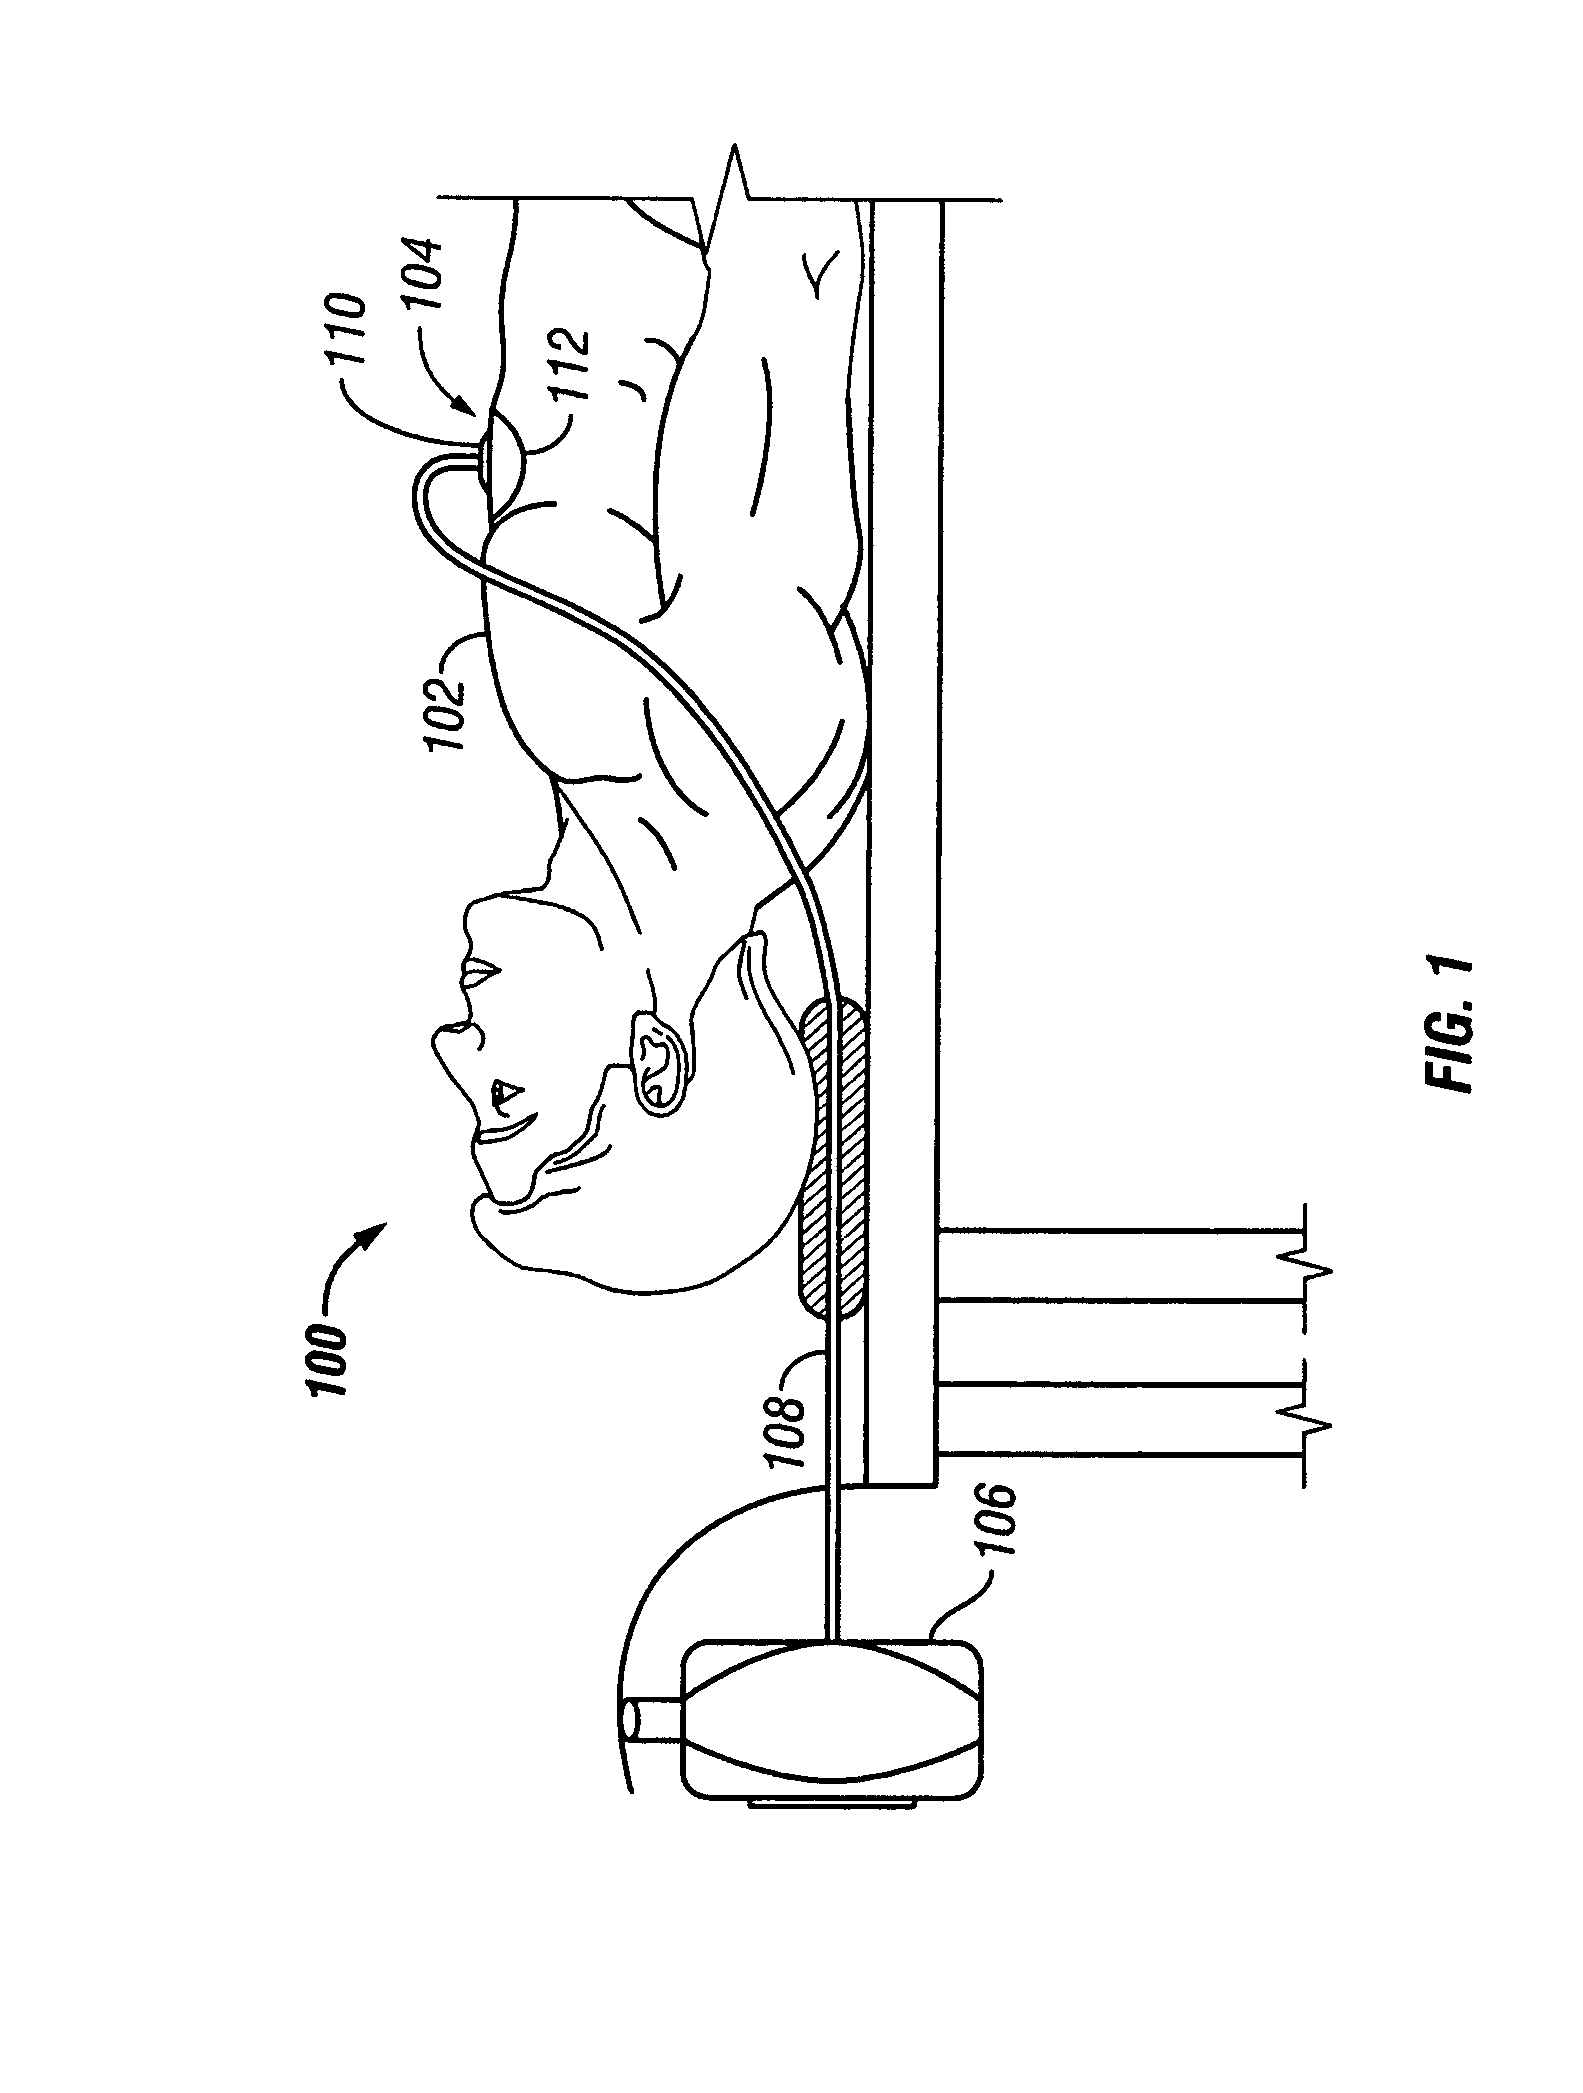 System and method for locating fluid leaks at a drape of a reduced pressure delivery system